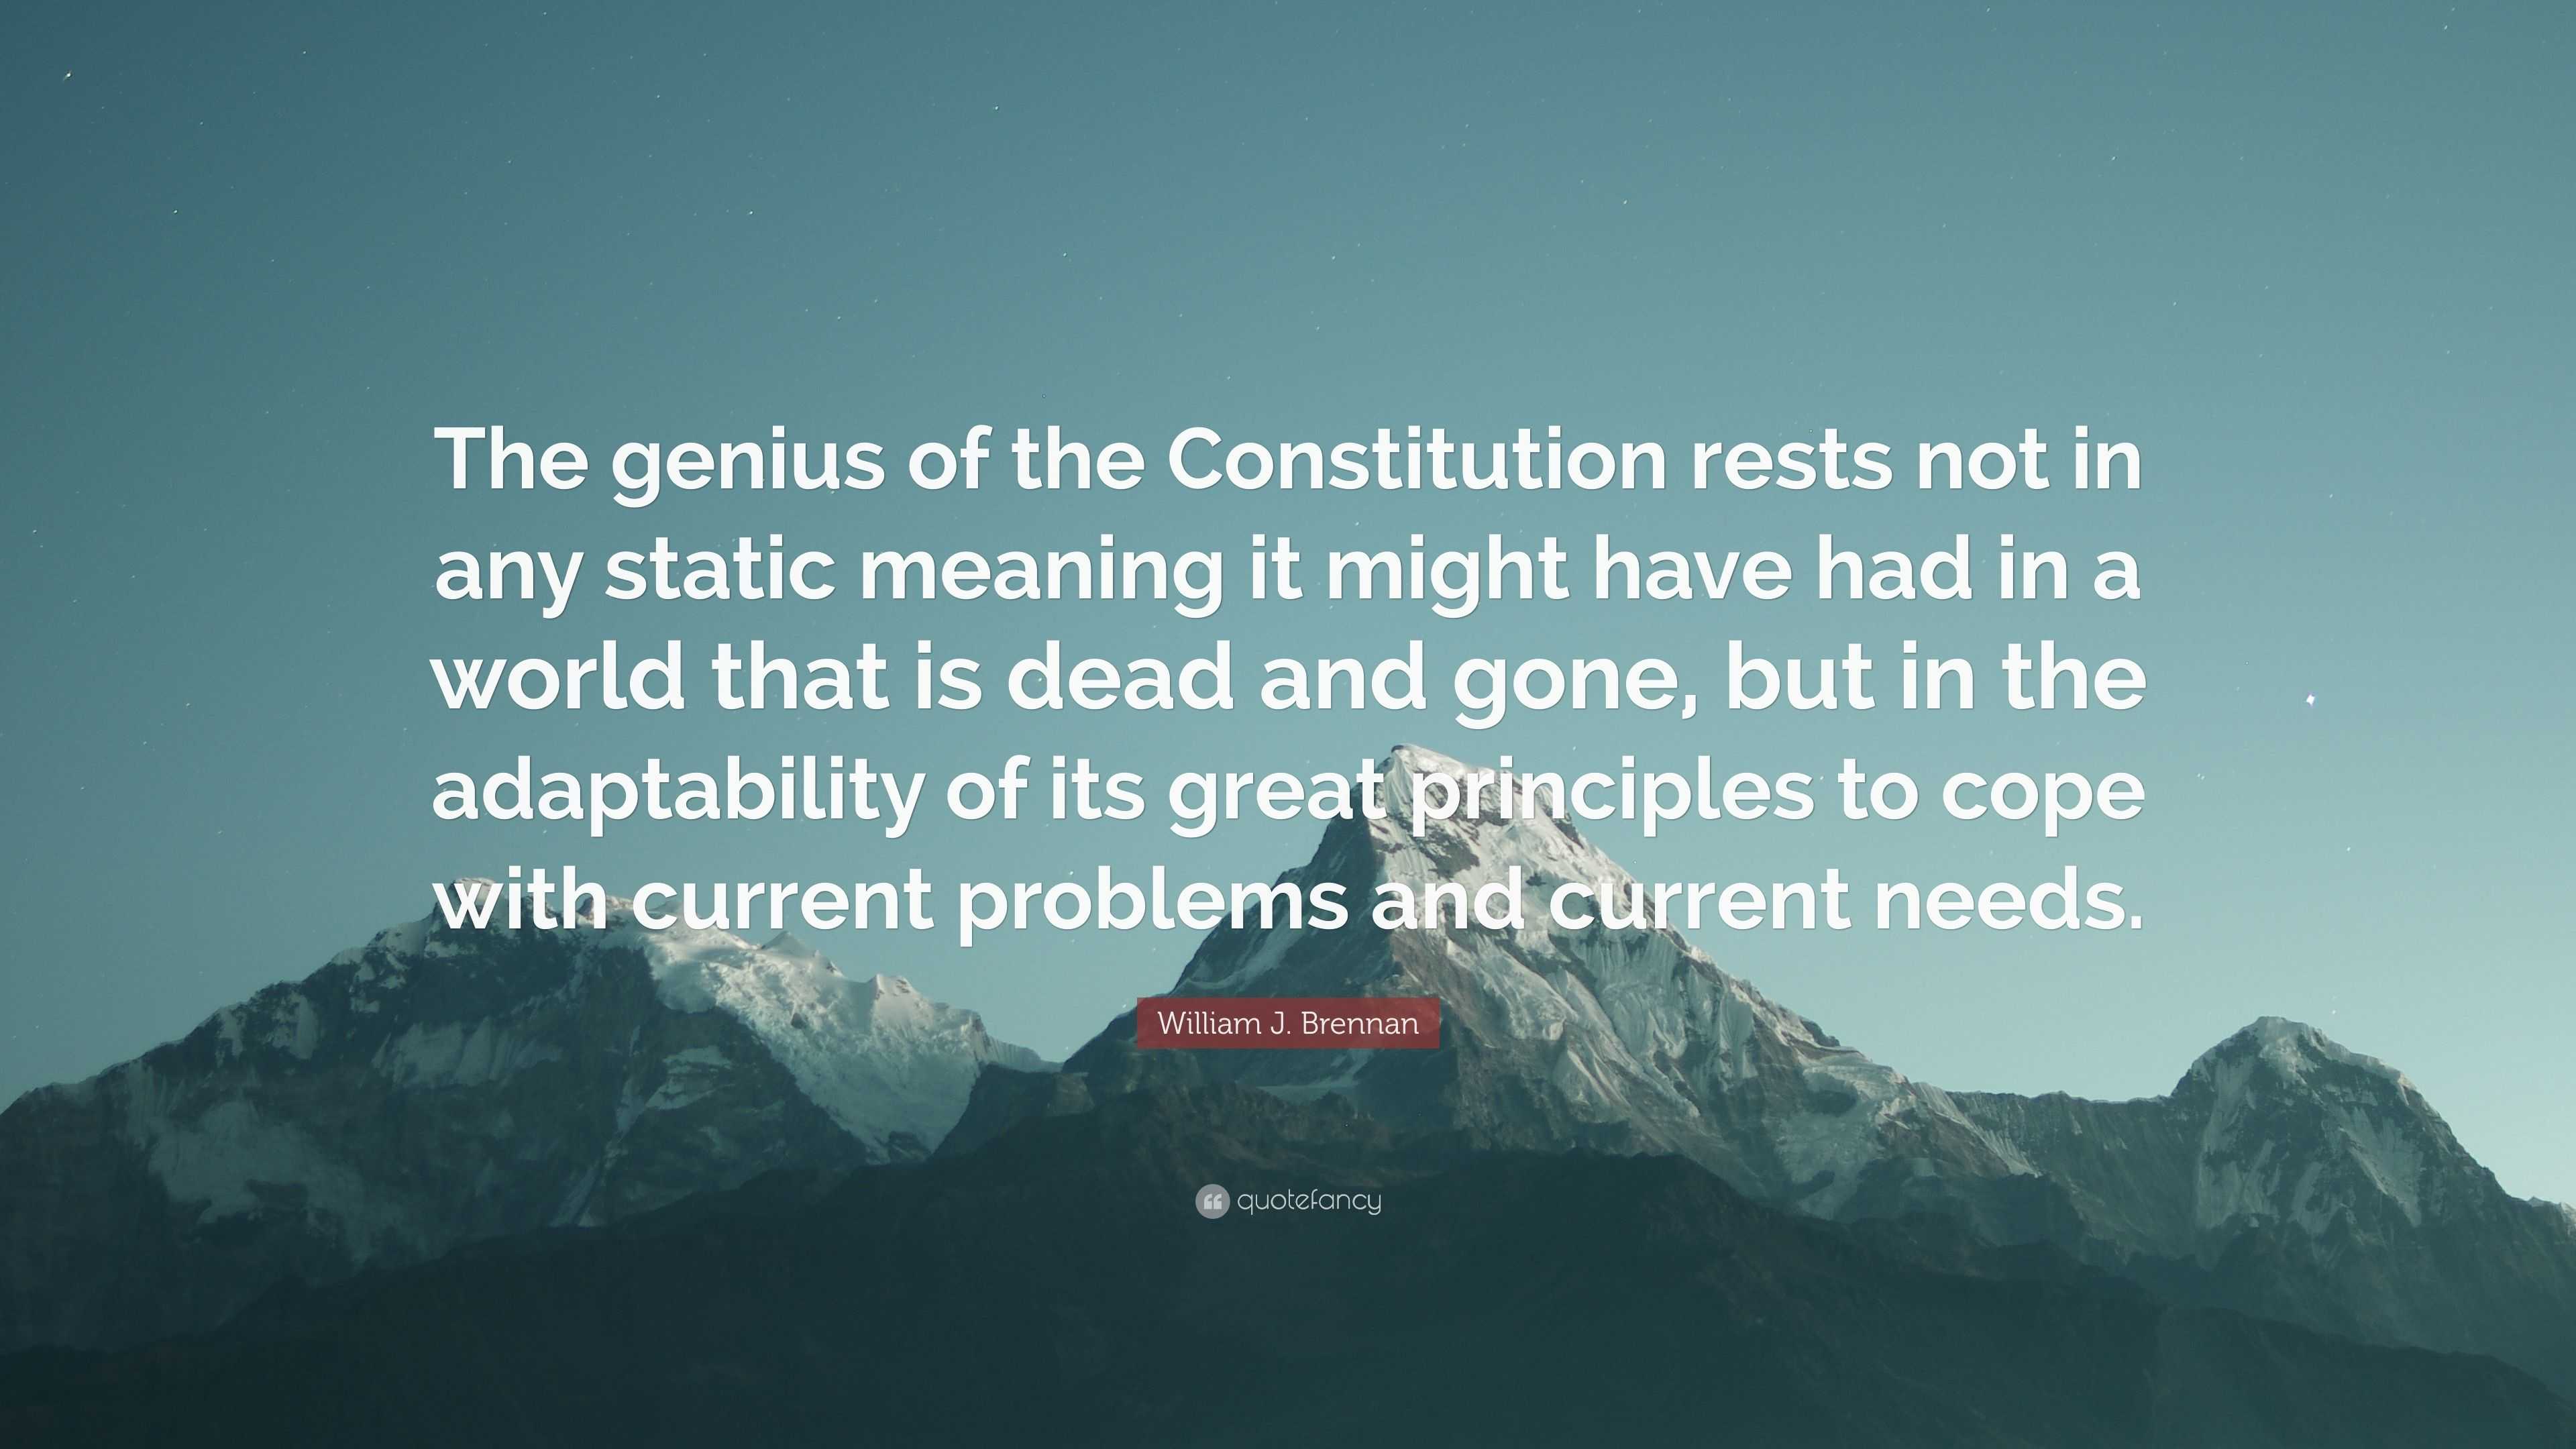 William J Brennan Quote “the Genius Of The Constitution Rests Not In Any Static Meaning It 3552